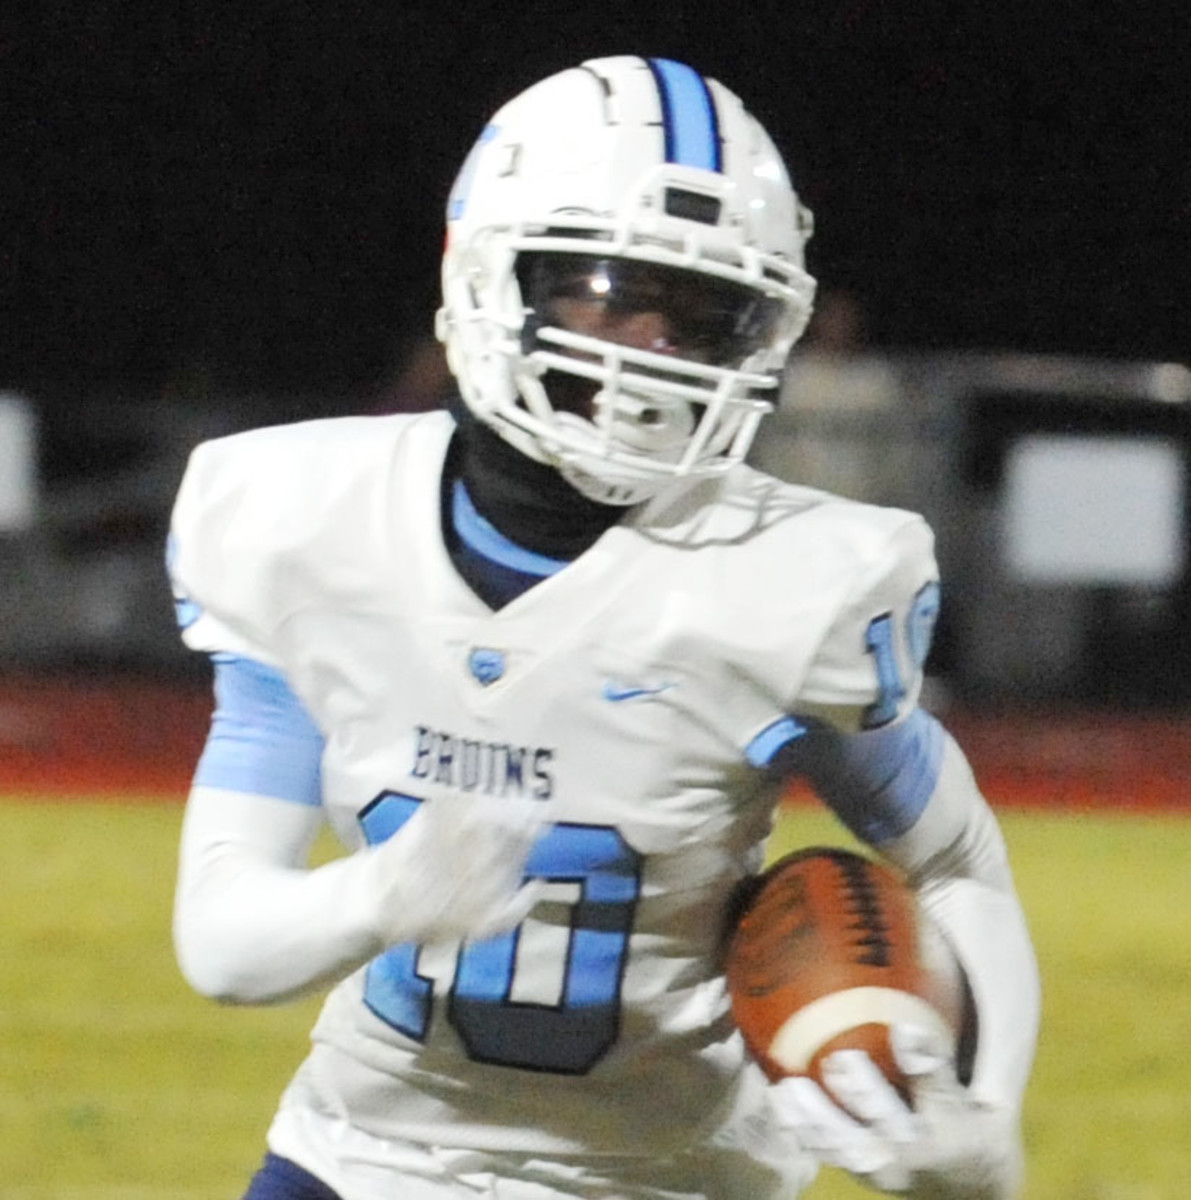 South Florence wide receiver Evin Singletary runs after catching a pass against North Myrtle Beach.